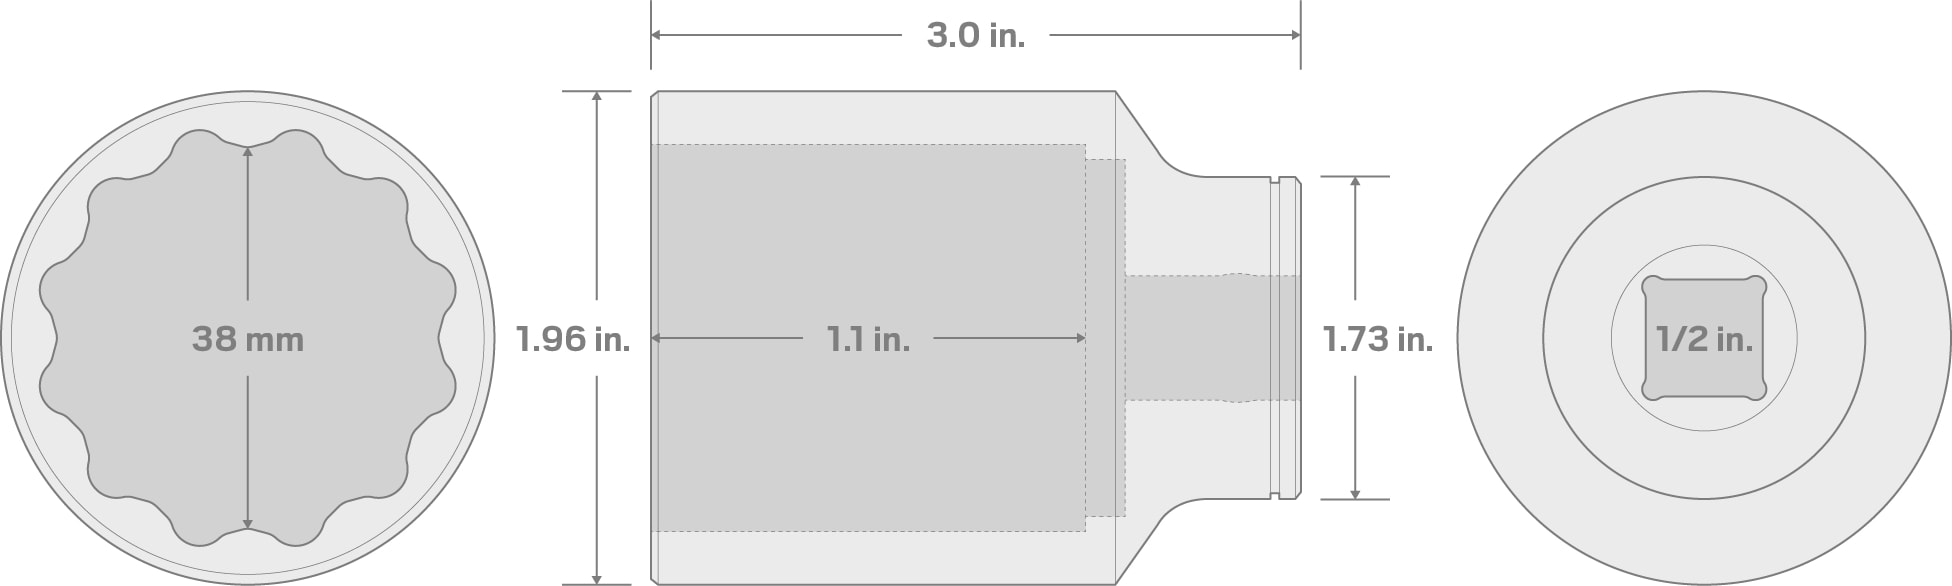 Specs for 1/2 Inch Drive x 38 mm Deep 12-Point Socket